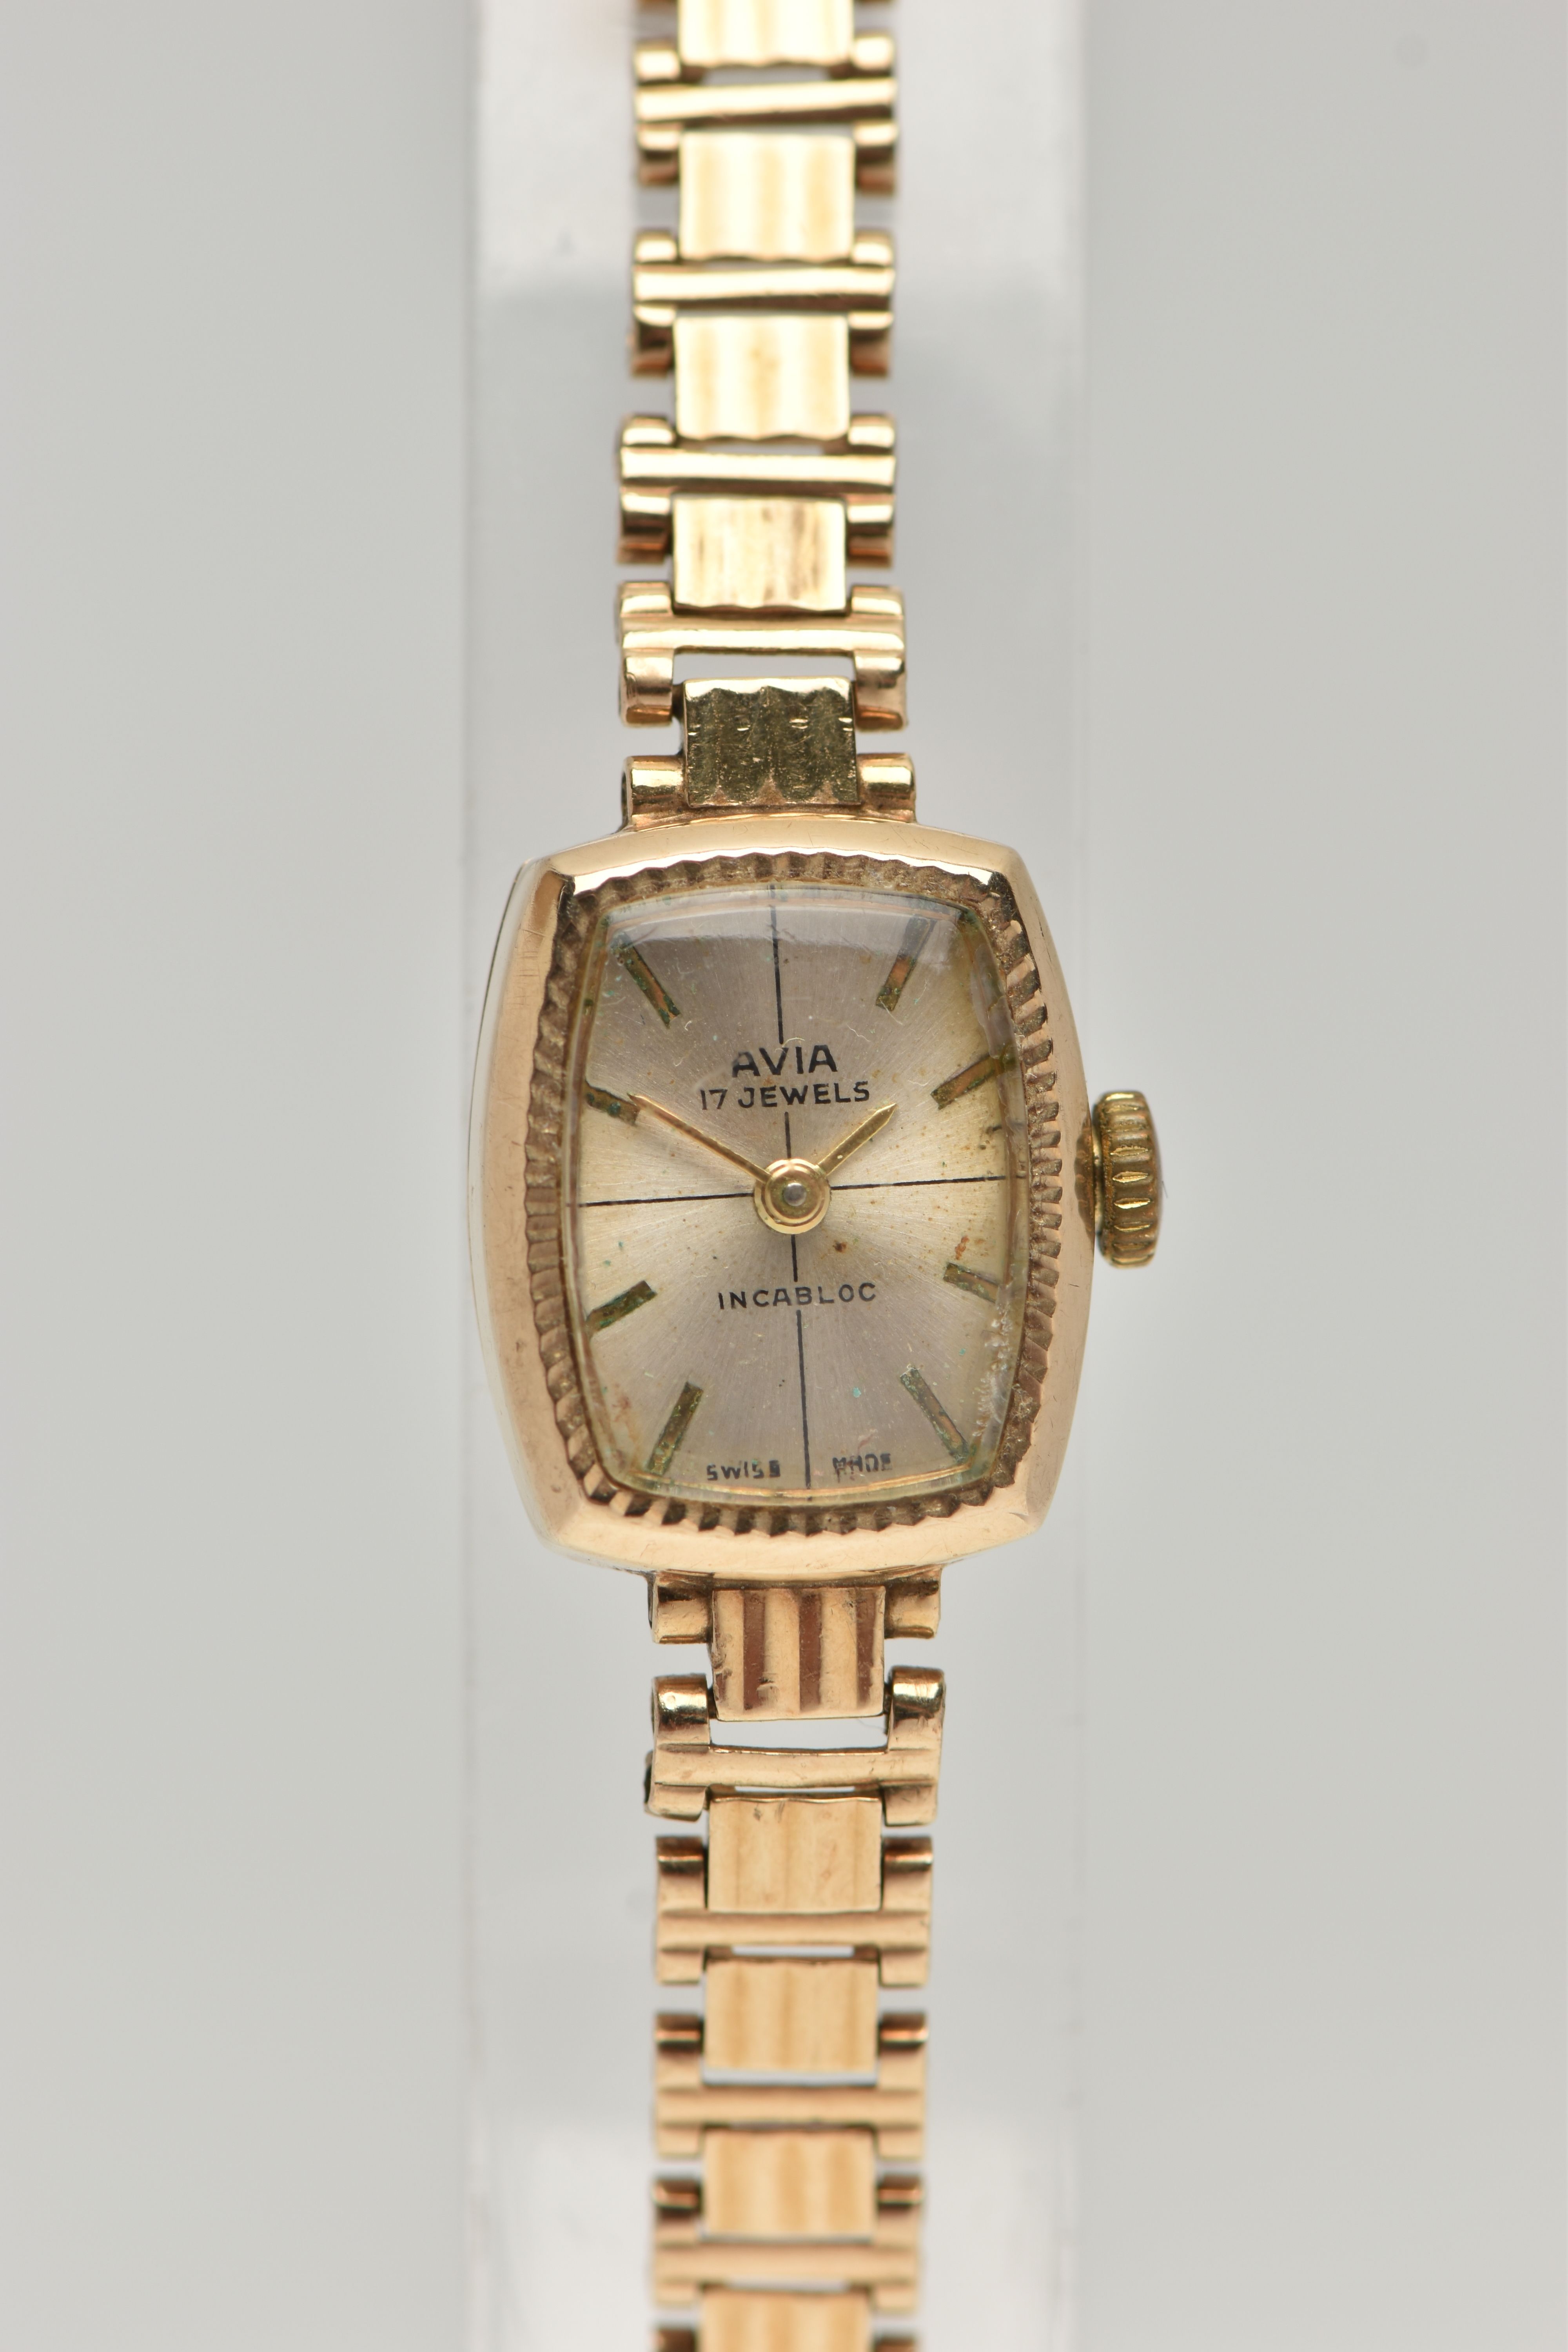 A LADYS 'AVIA' WRISTWATCH, manual wind, rounded rectangular dial signed 'Avia 17 jewels,